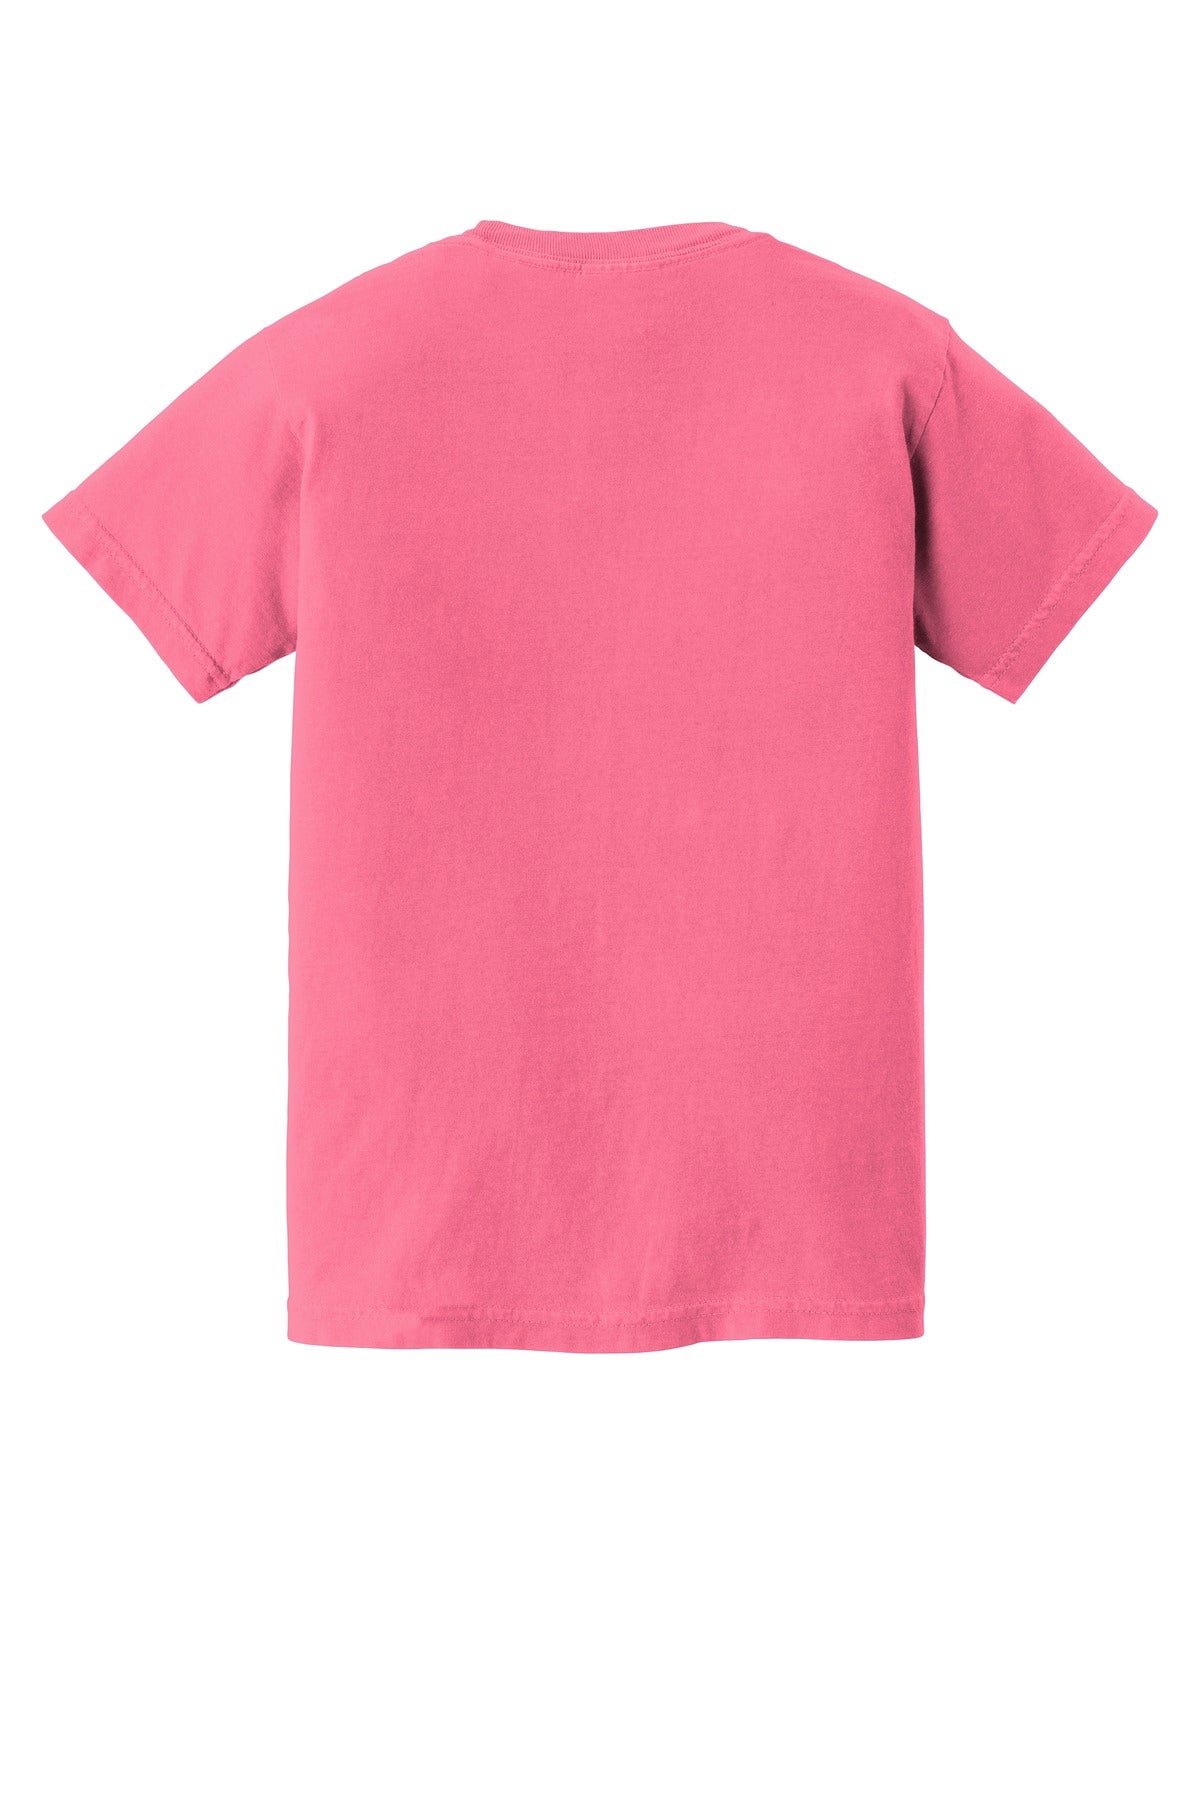 COMFORT COLORS  Youth Heavyweight Ring Spun Tee. 9018